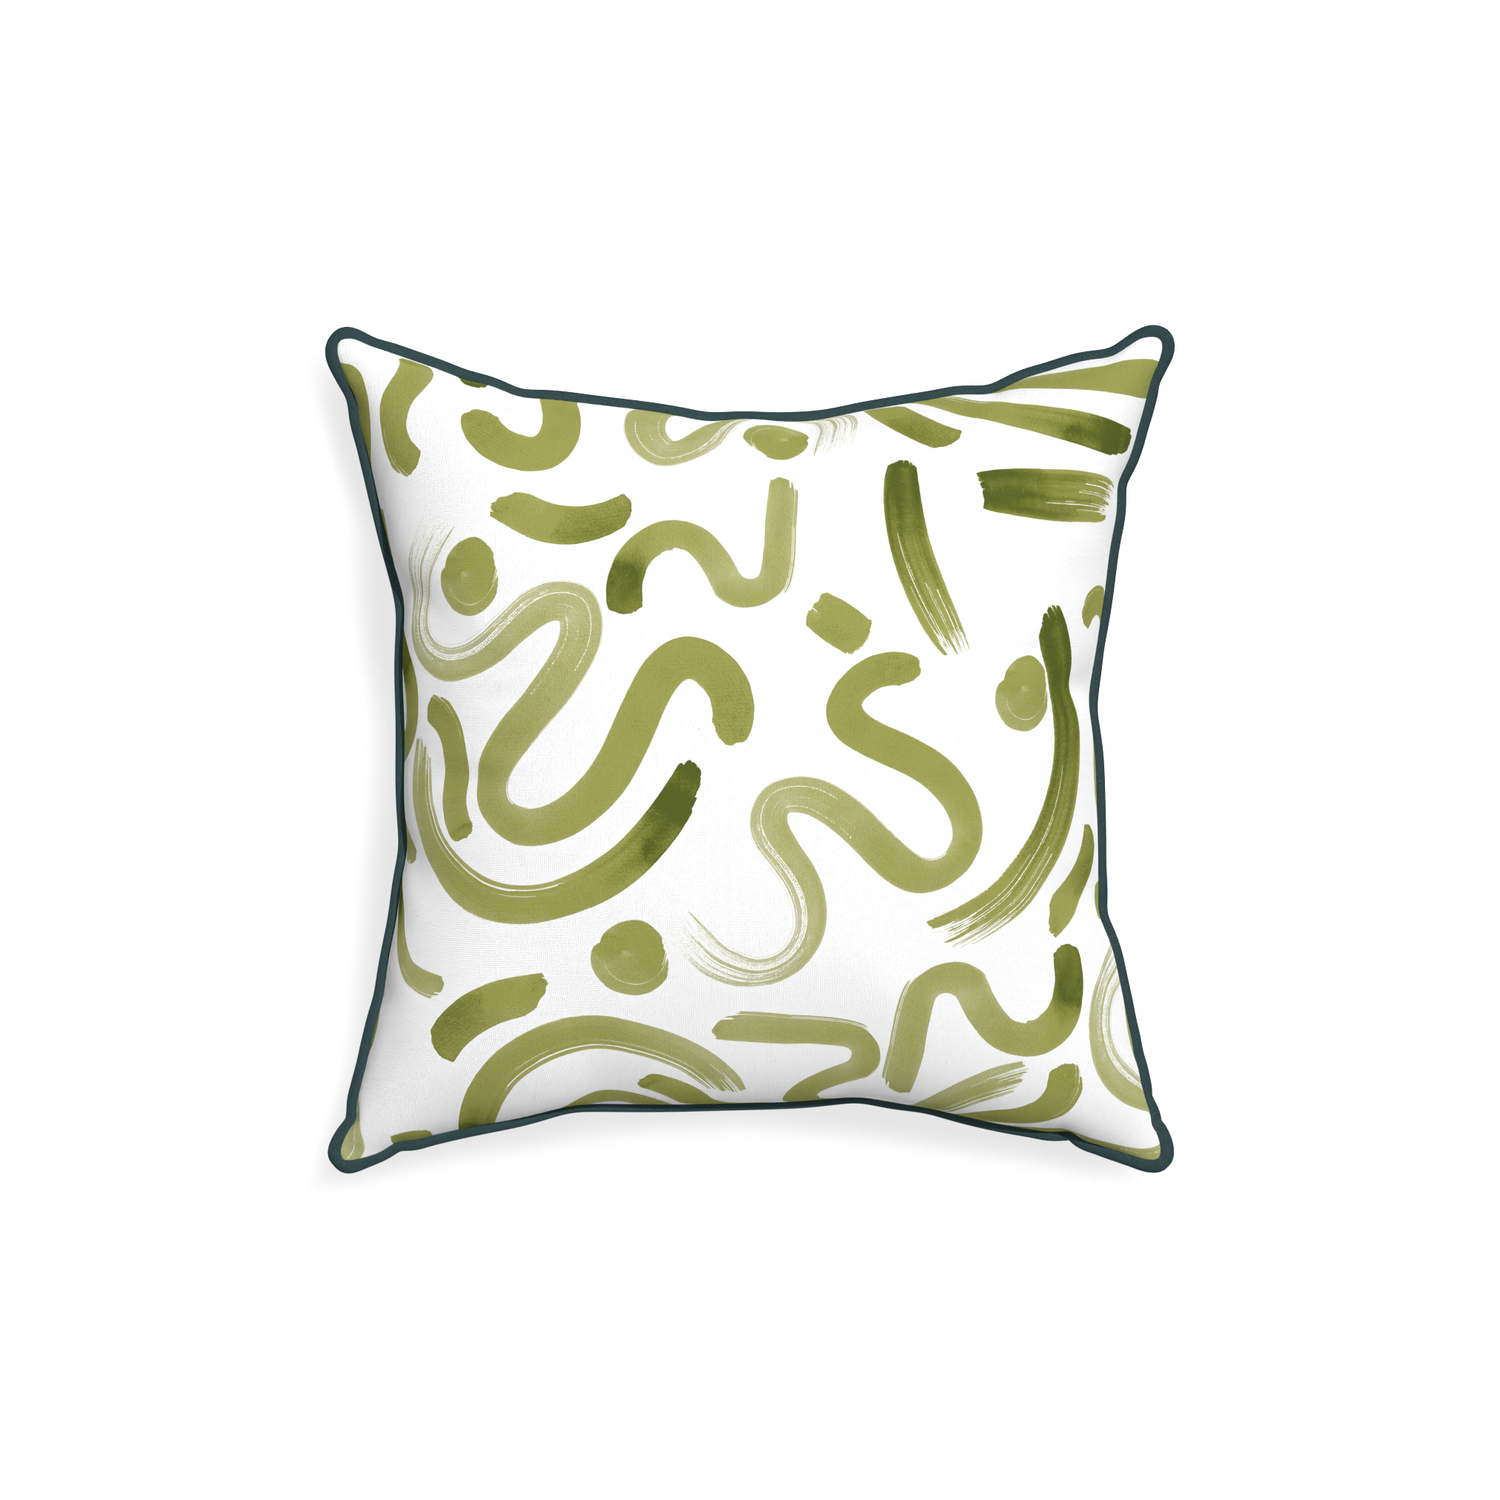 18-square hockney moss custom moss greenpillow with p piping on white background